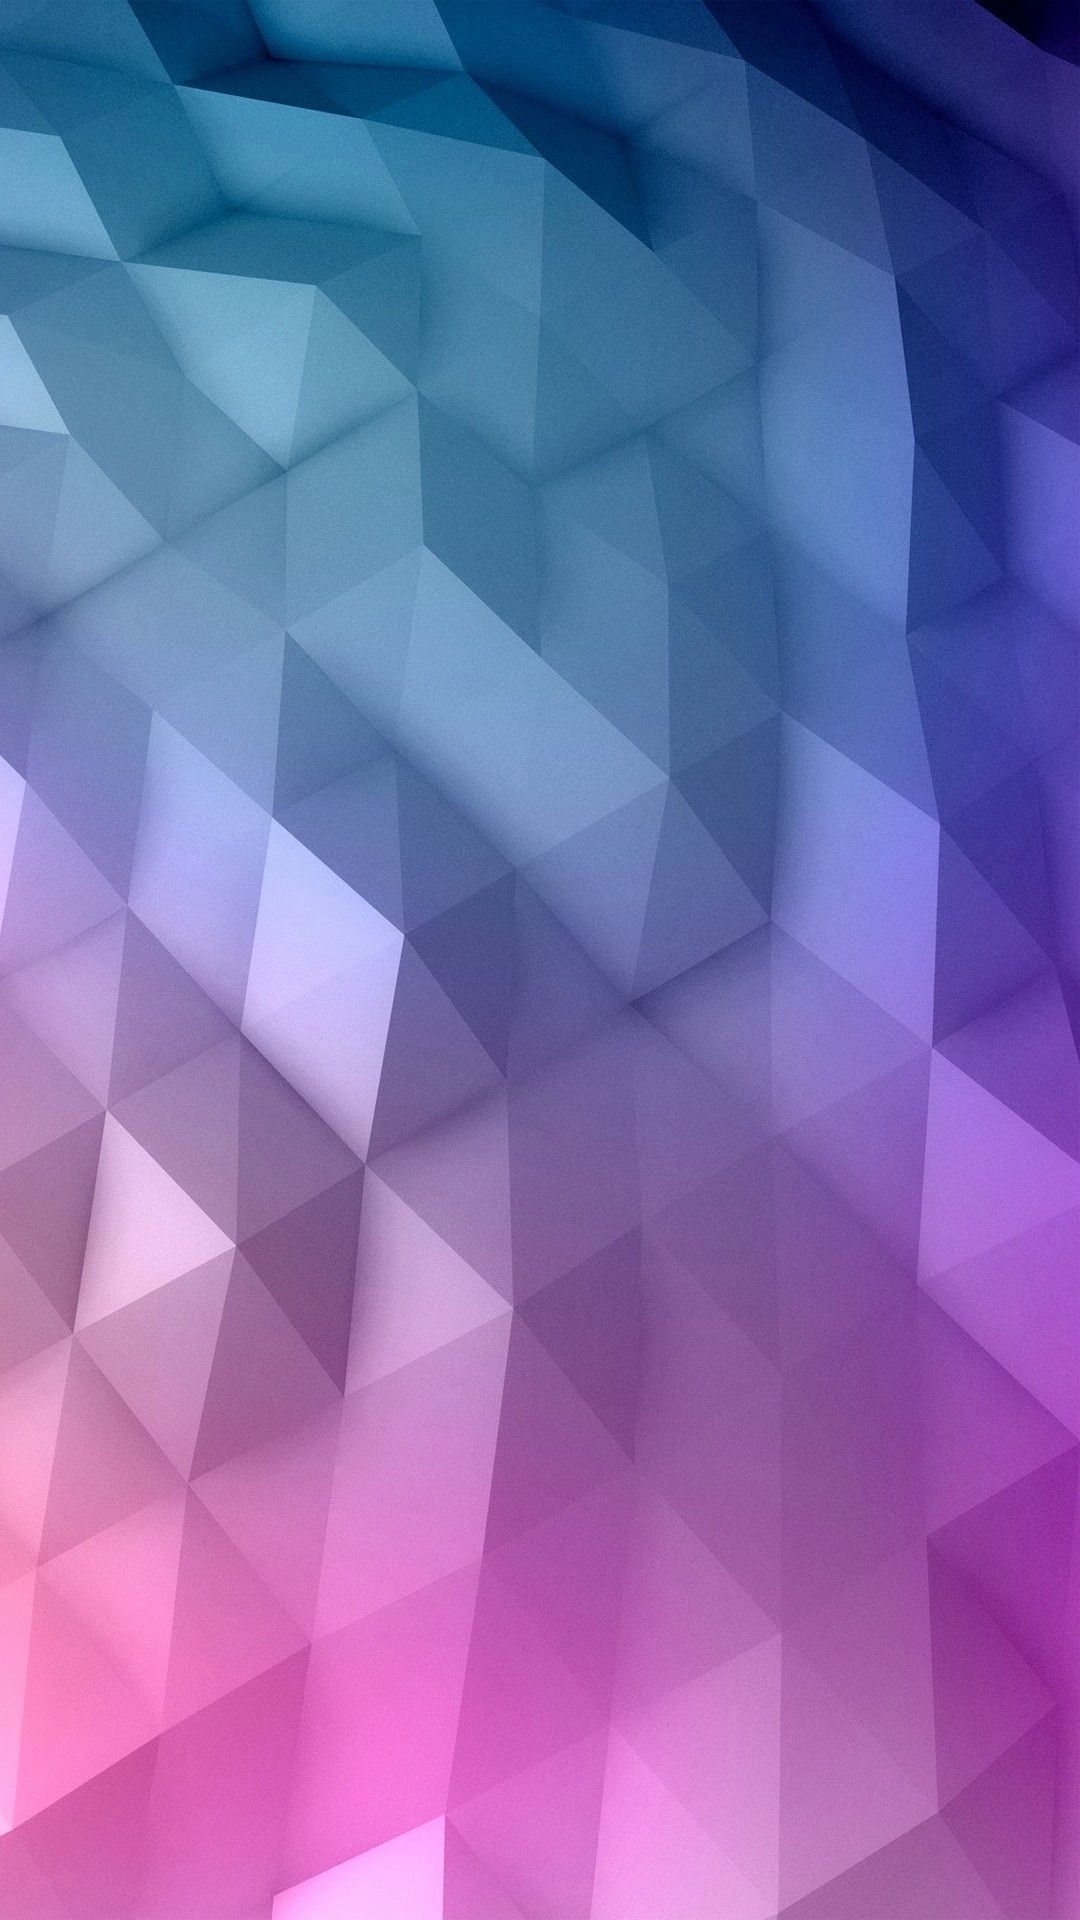 Geometric iPhone Wallpaper Best Of iPhone 6 Wallpaper This